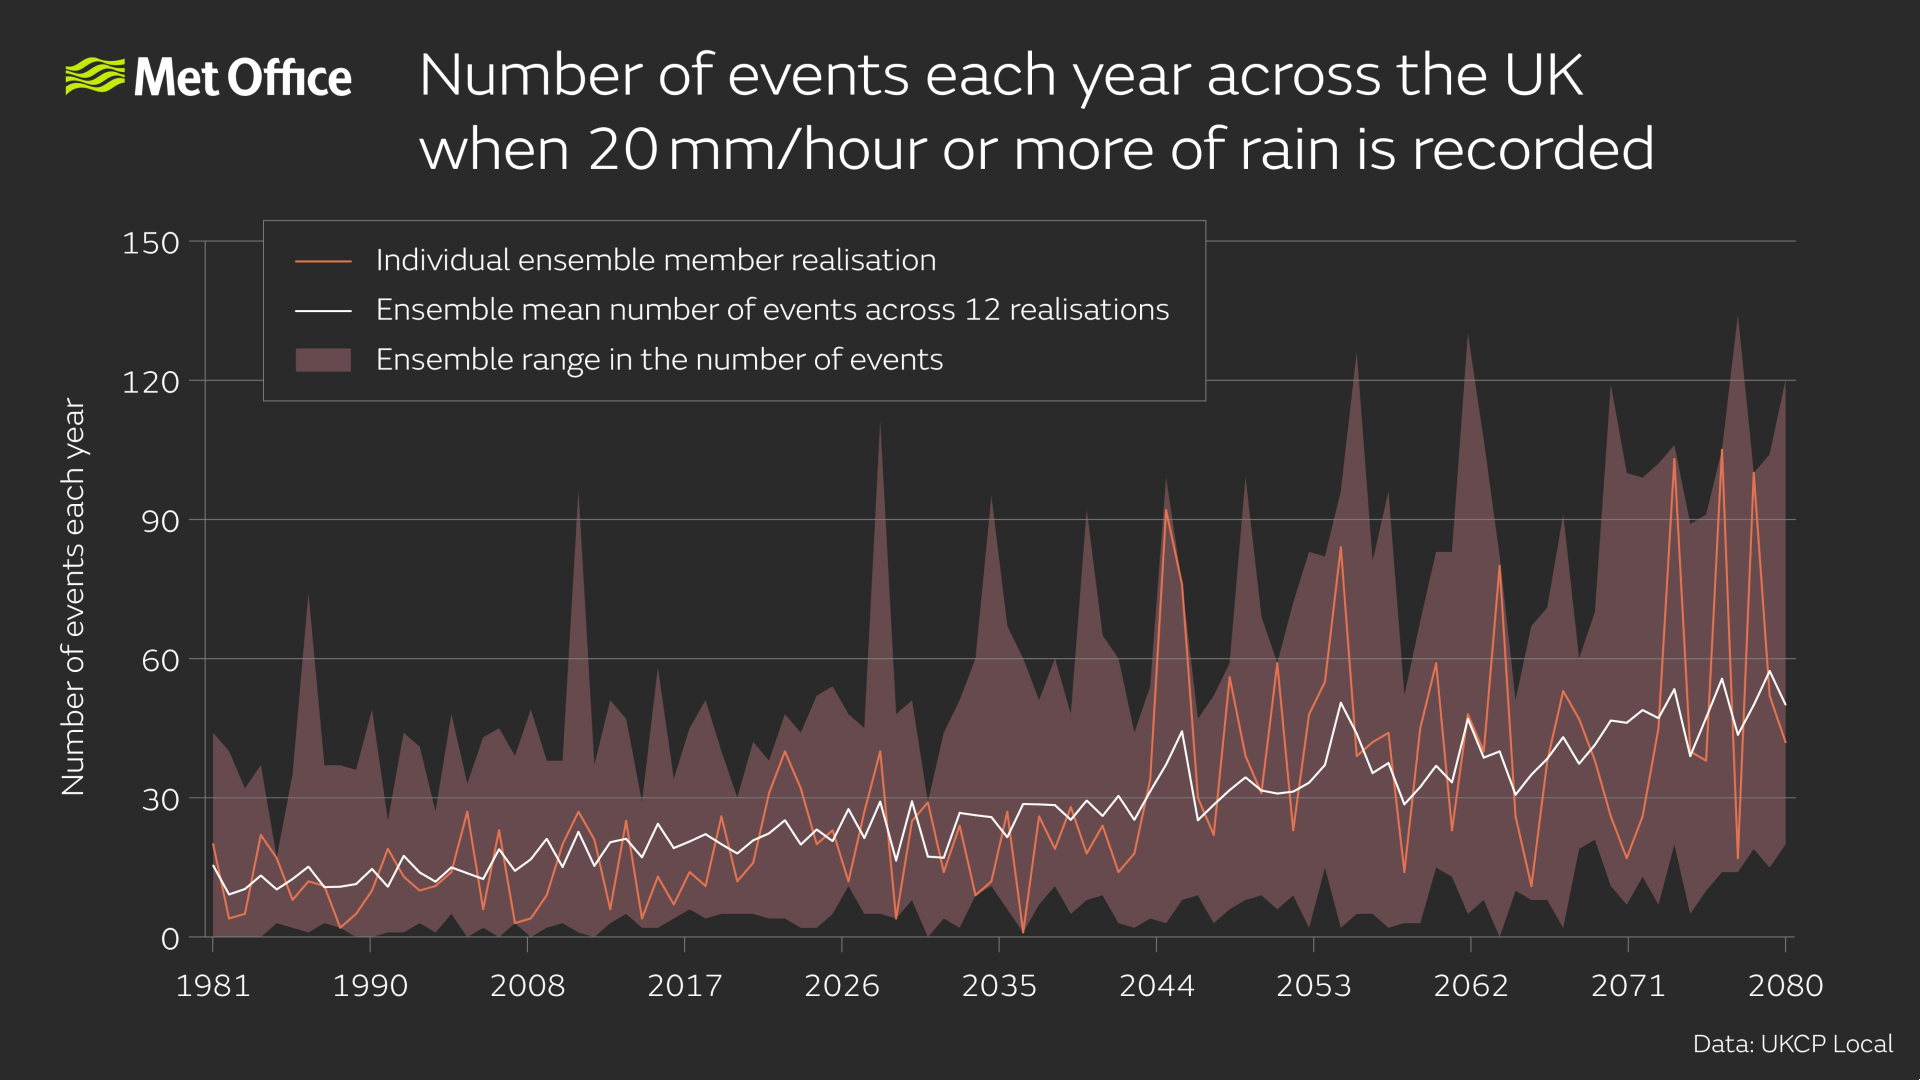 Line graph dating from 1981-2080, showing the number of events each year across the UK when 20mm per hour or more of rain is recorded. Graph depicts three datasets: 1. An individual ensemble member realisation, 2. An ensemble mean number of events across 12 realisations, 3. Ensemble range in the number of events. Whilst there are regular peaks and troughs in rainfall event frequency, the graph shows an overall trend of increasing extreme rainfall events year on year.